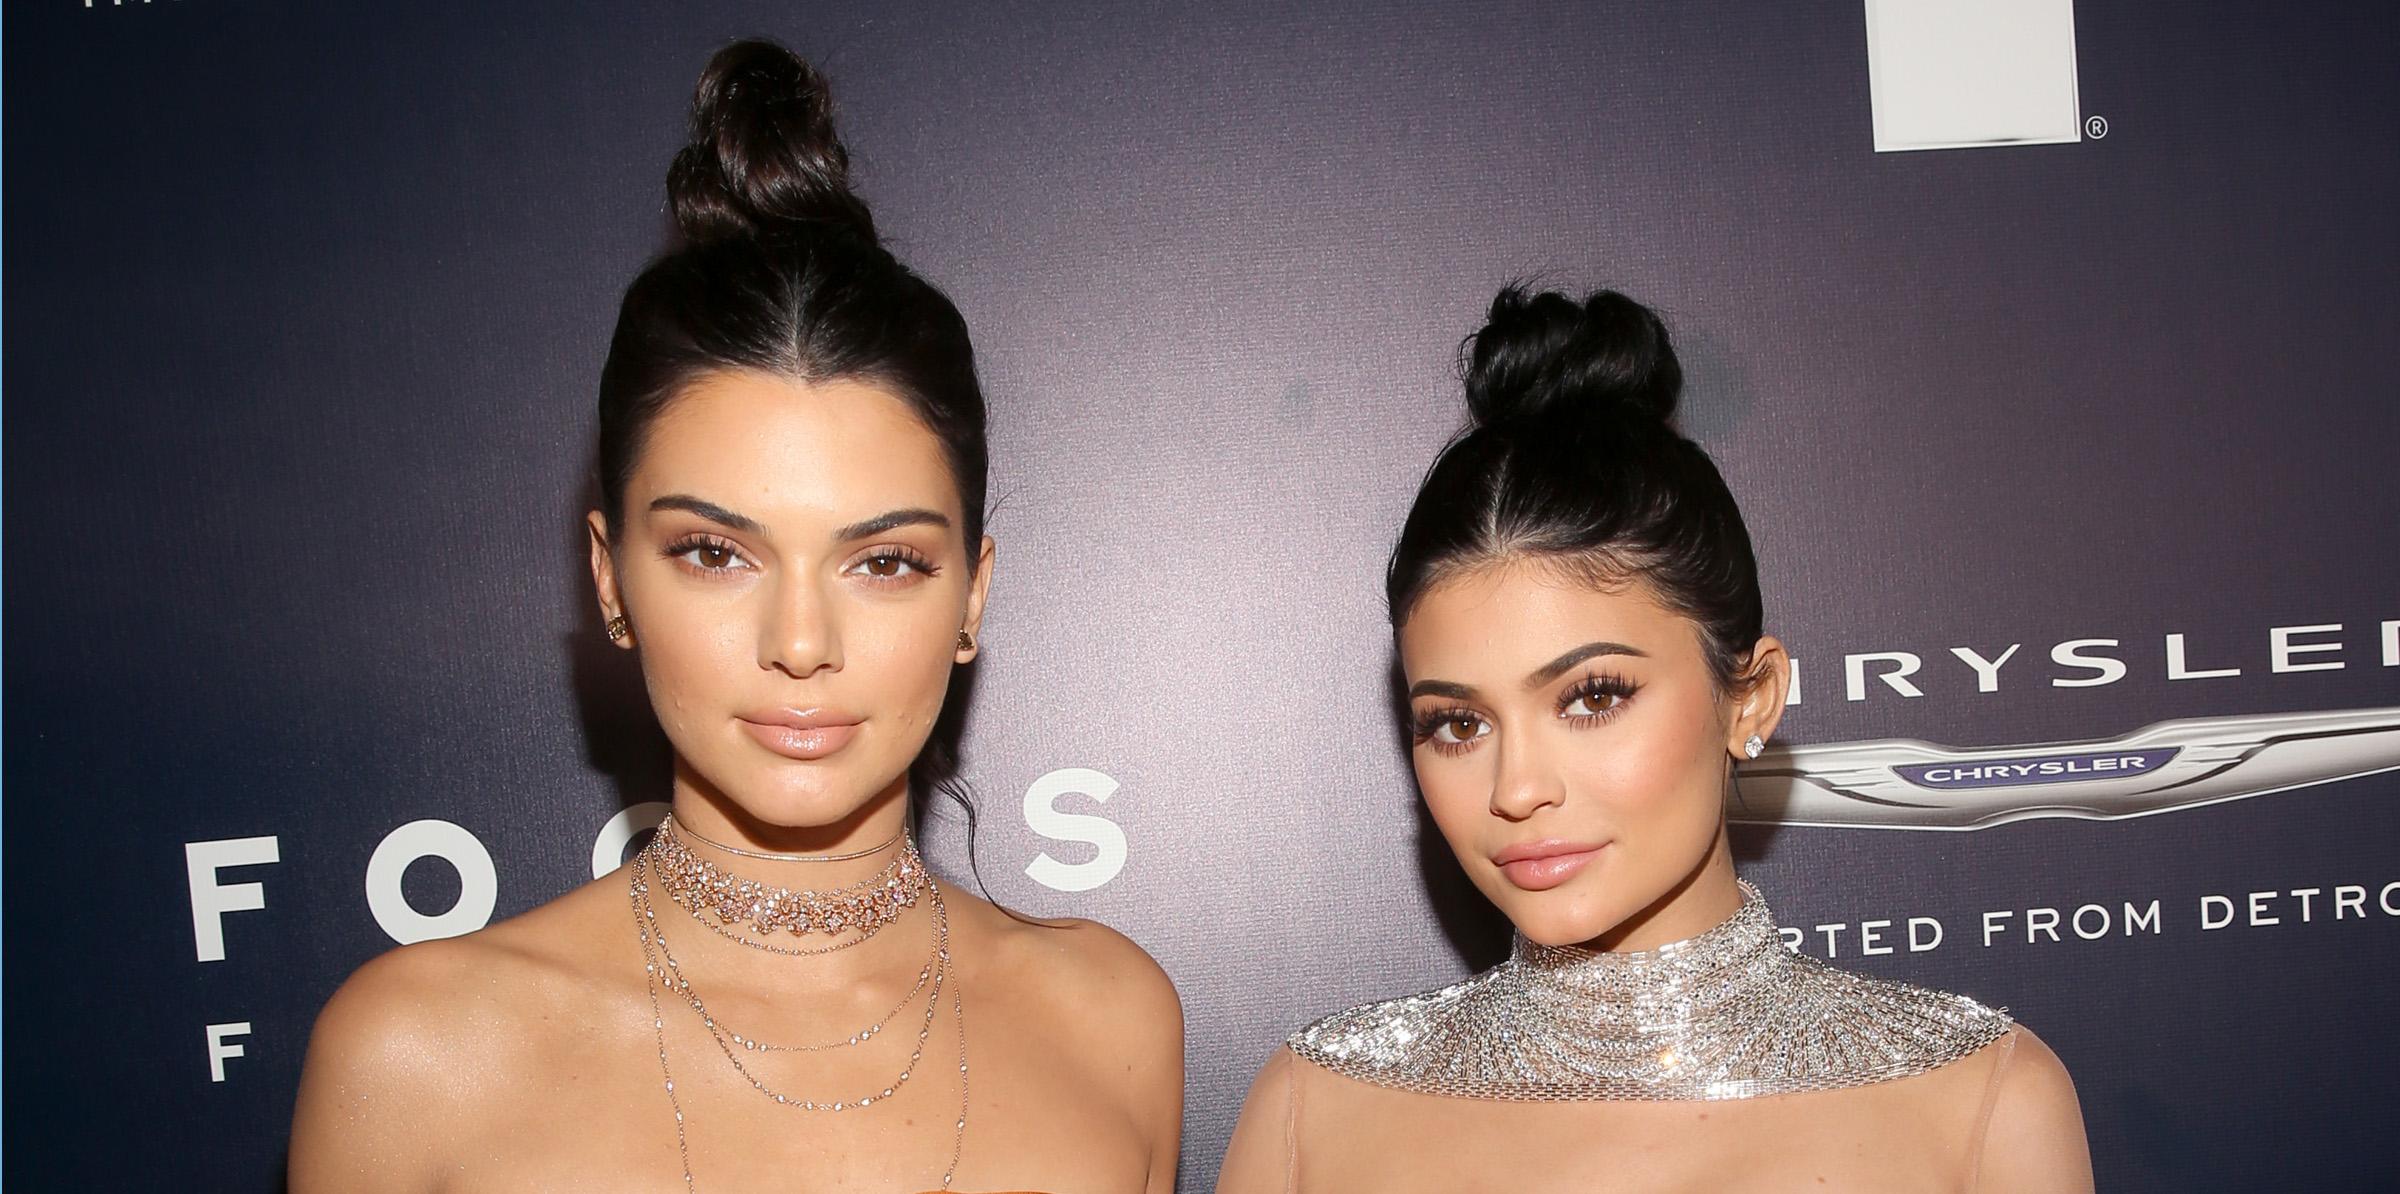 Kylie Jenner Shames Kendall For Not Wanting To Get Plastic Surgery